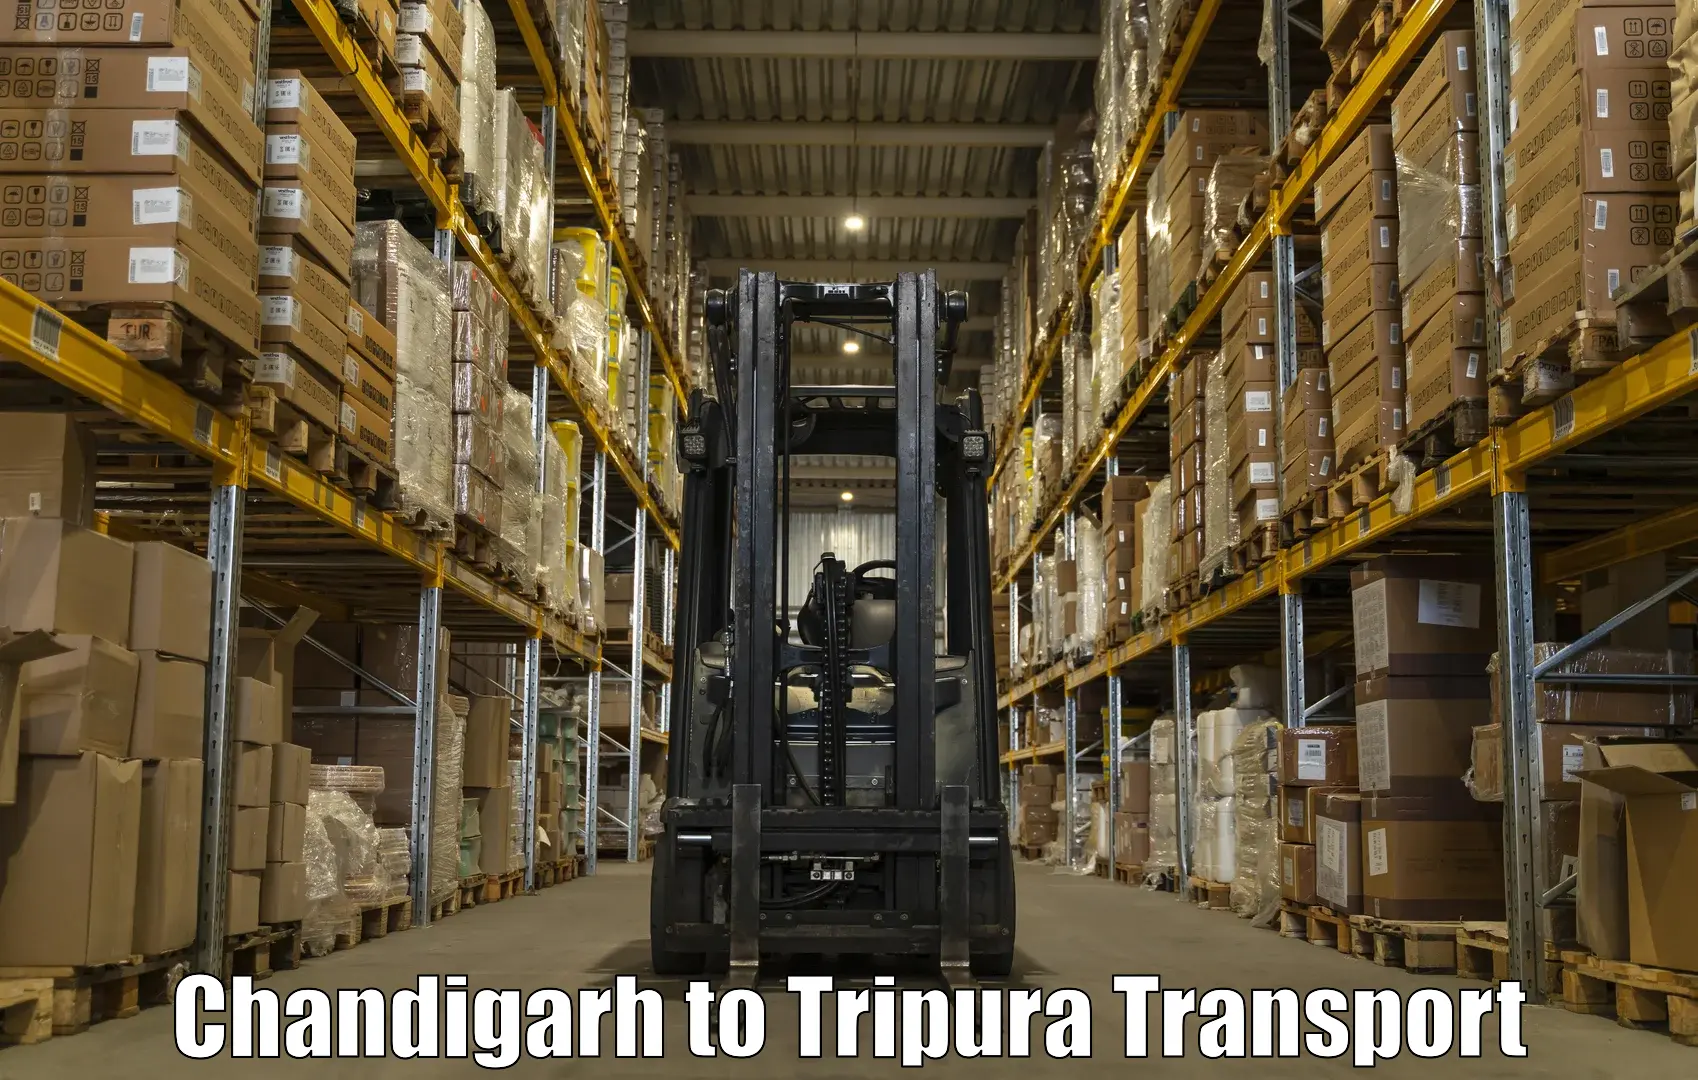 Vehicle courier services Chandigarh to Udaipur Tripura